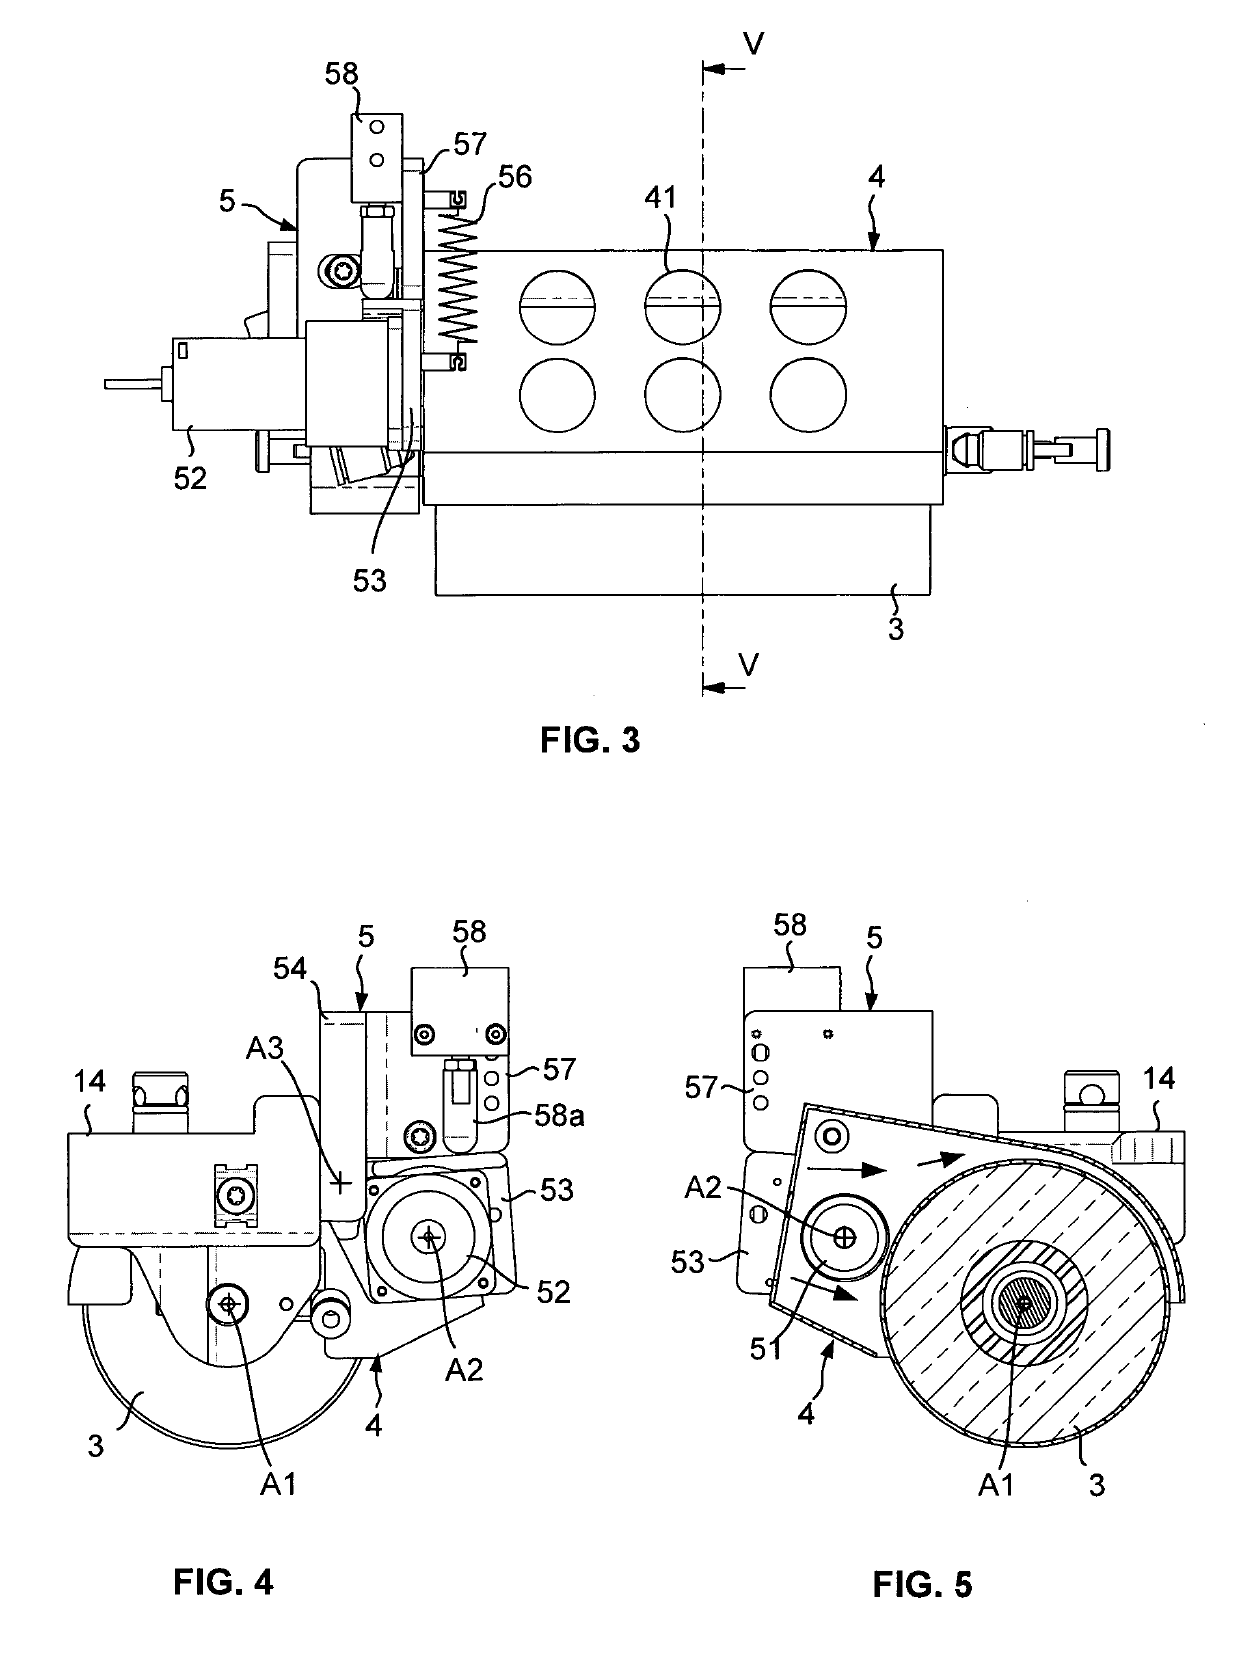 Fiber application head with a specific application roll